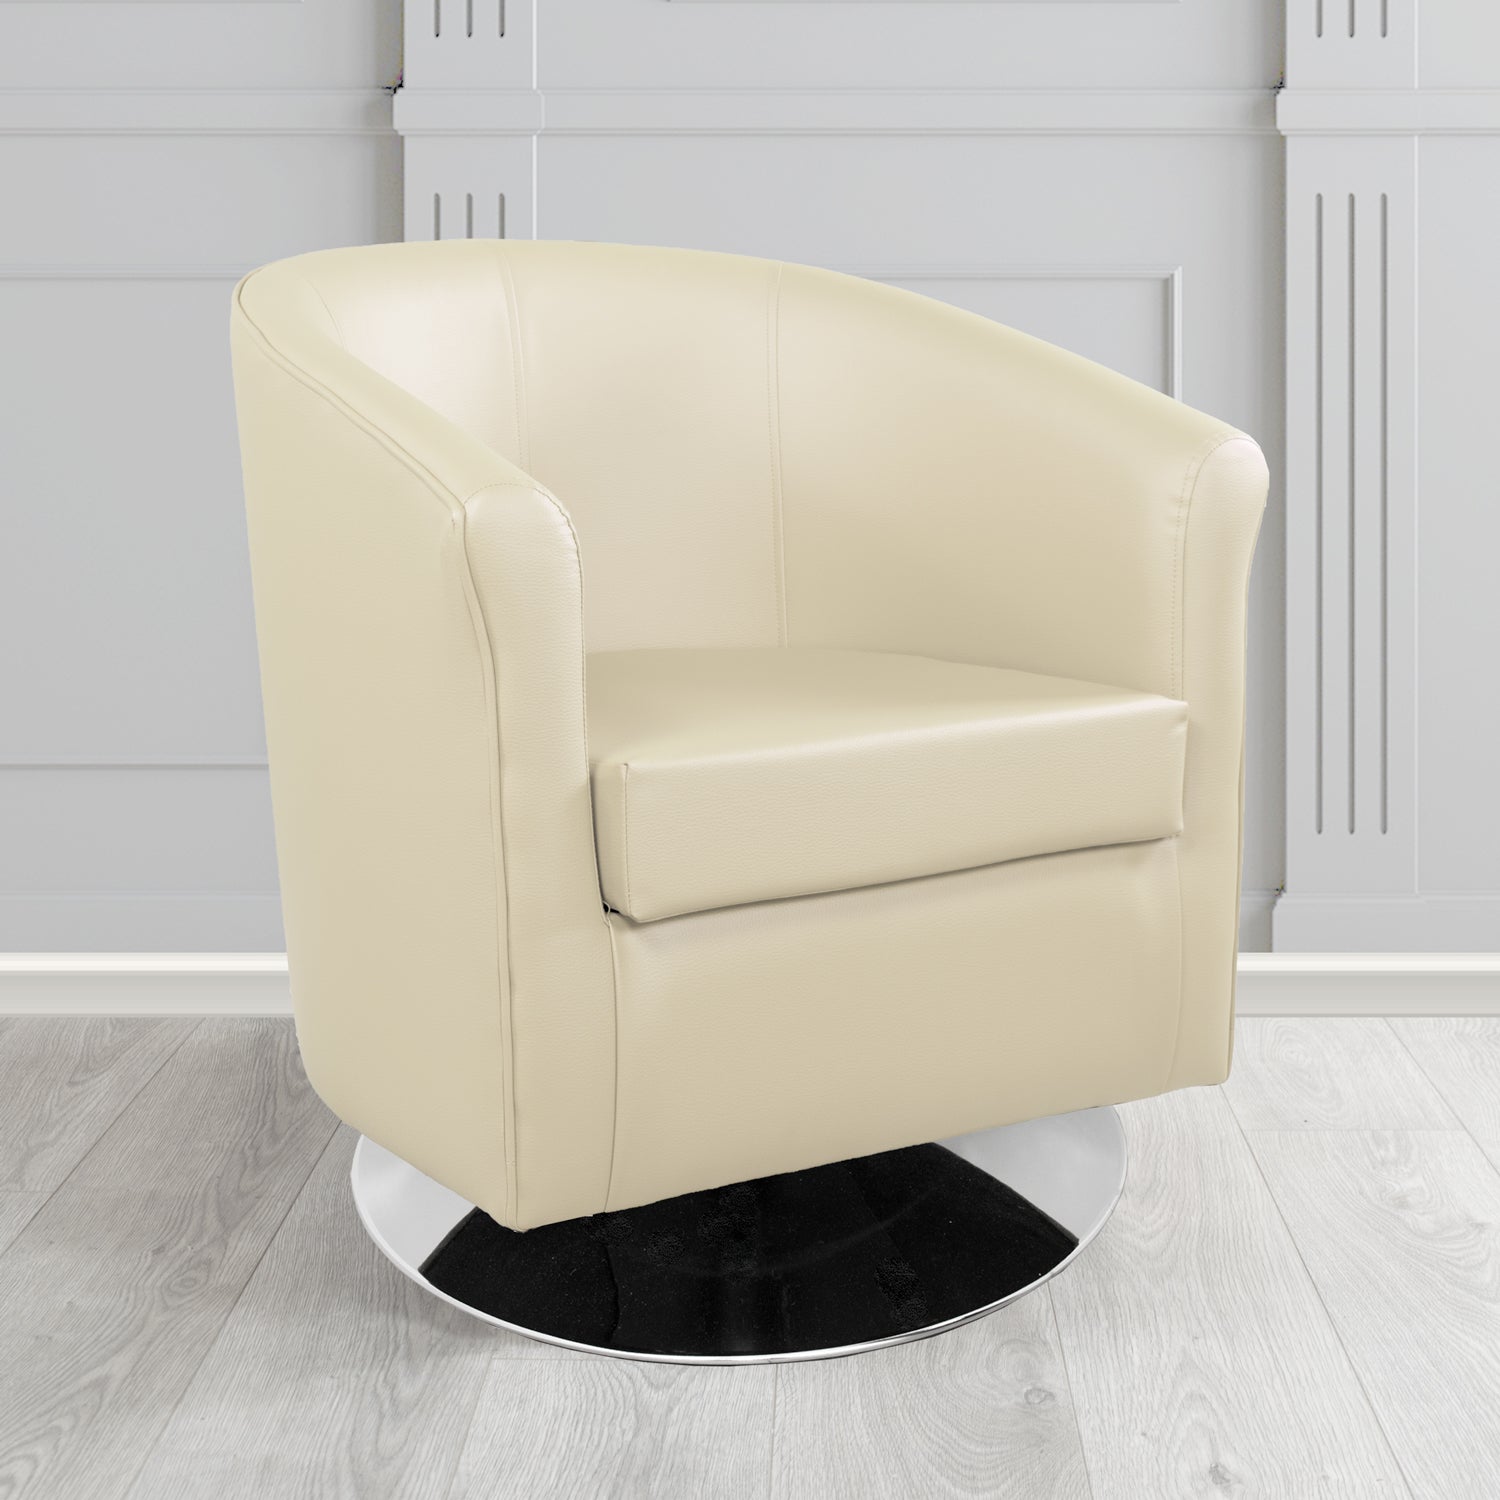 Tuscany Swivel Tub Chair in Madrid Cream Faux Leather